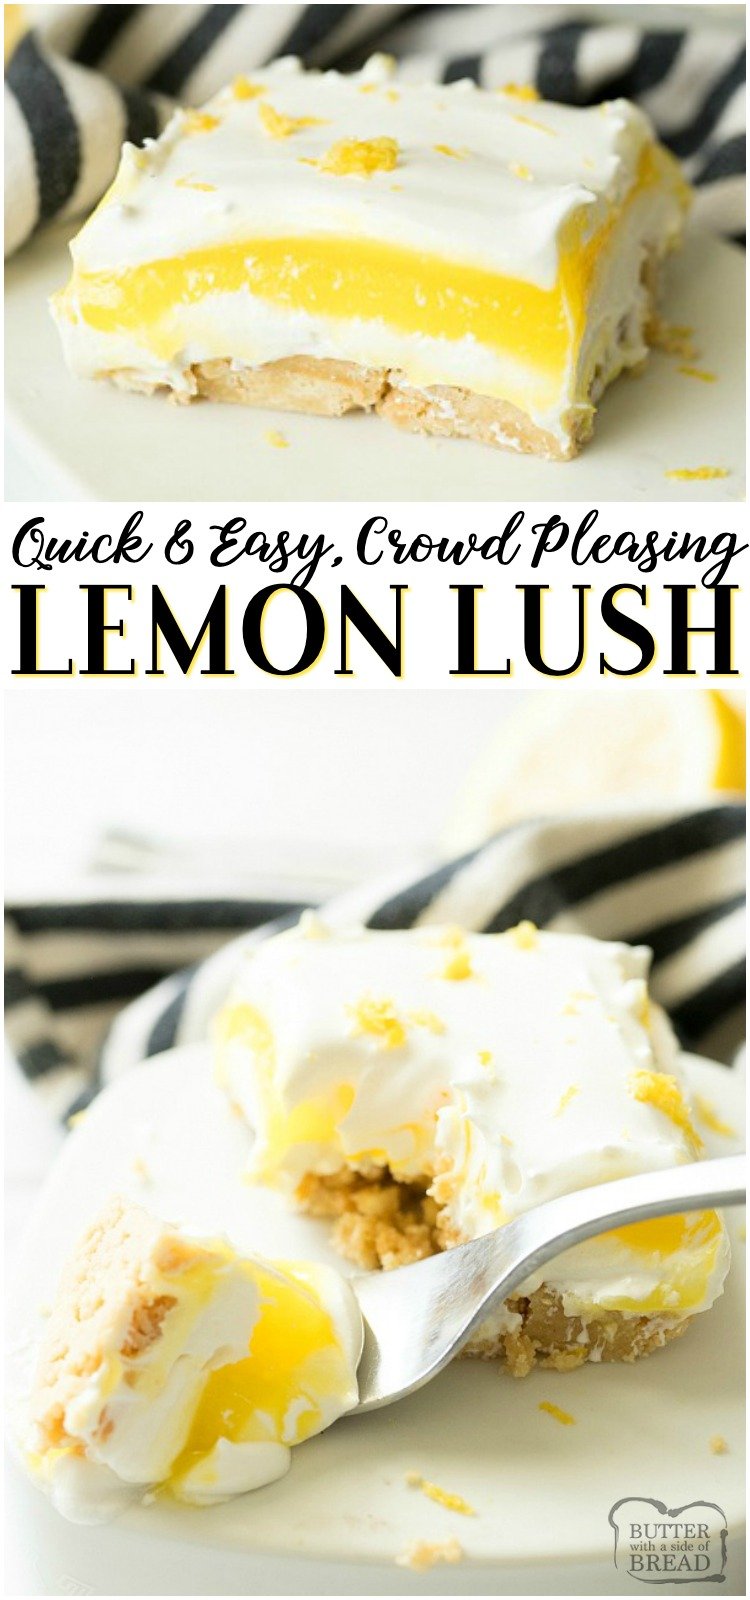 Lemon Lush Dessert made from lemon pudding mix, cream cheese, whipped topping and golden Oreos. Easy to make no-bake lemon lush dessert perfect for summer get togethers! 